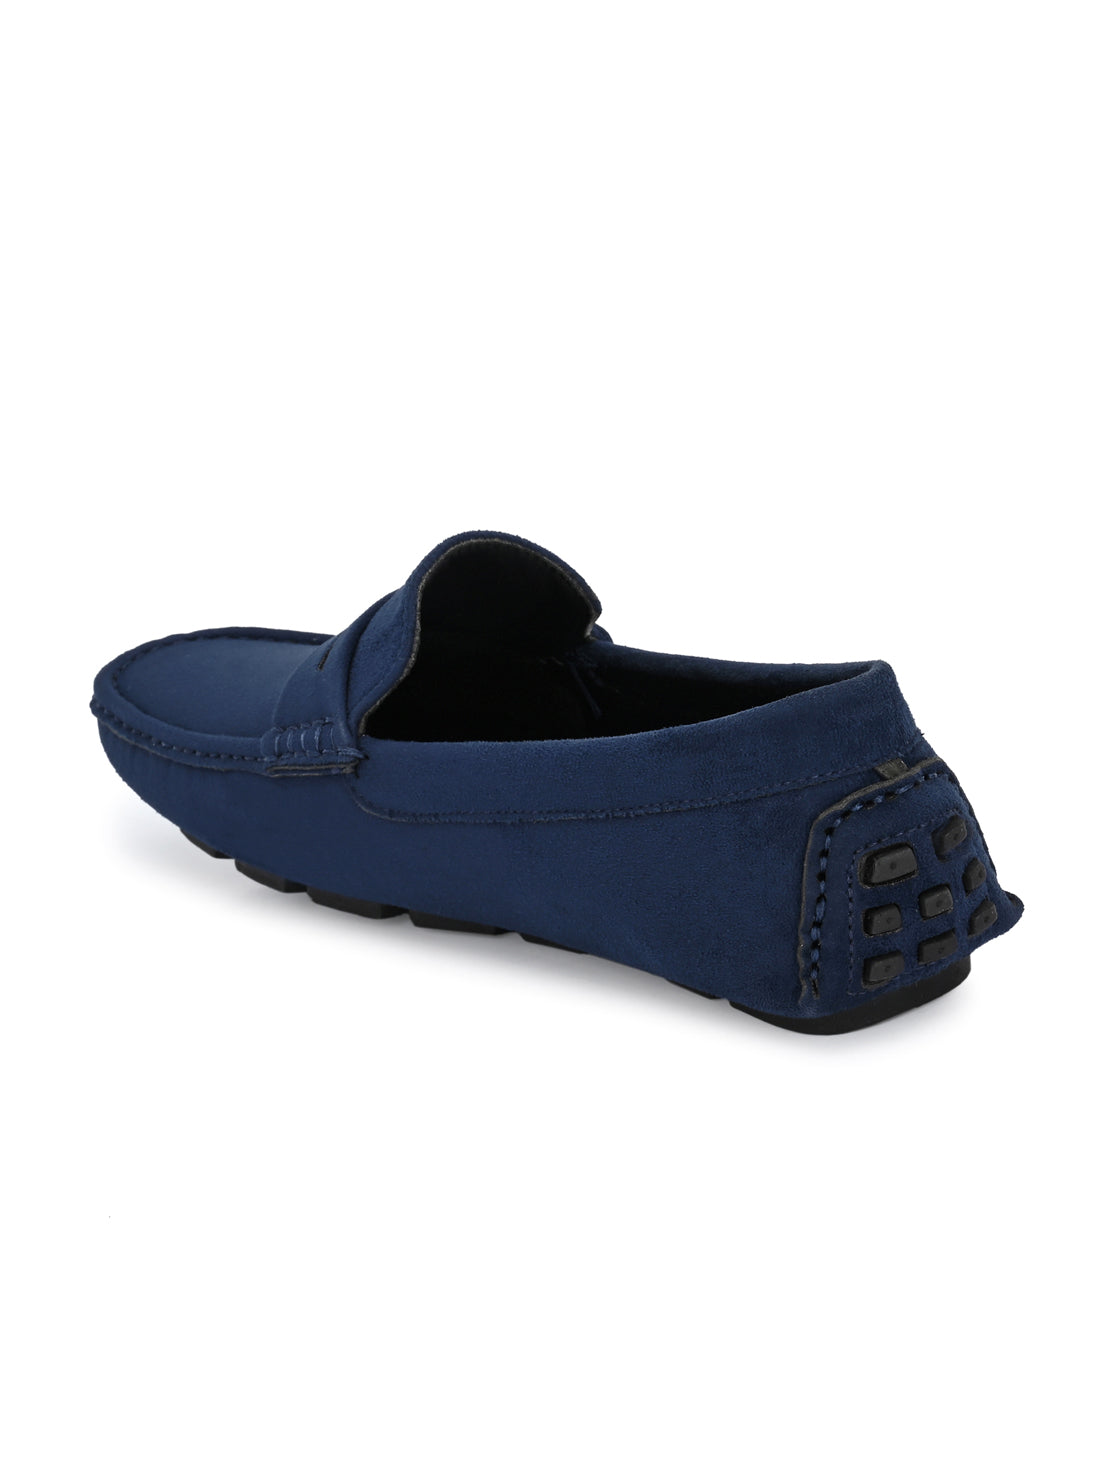 Guava Men's Blue Casual Slip On Driving Loafers (GV15JA754)